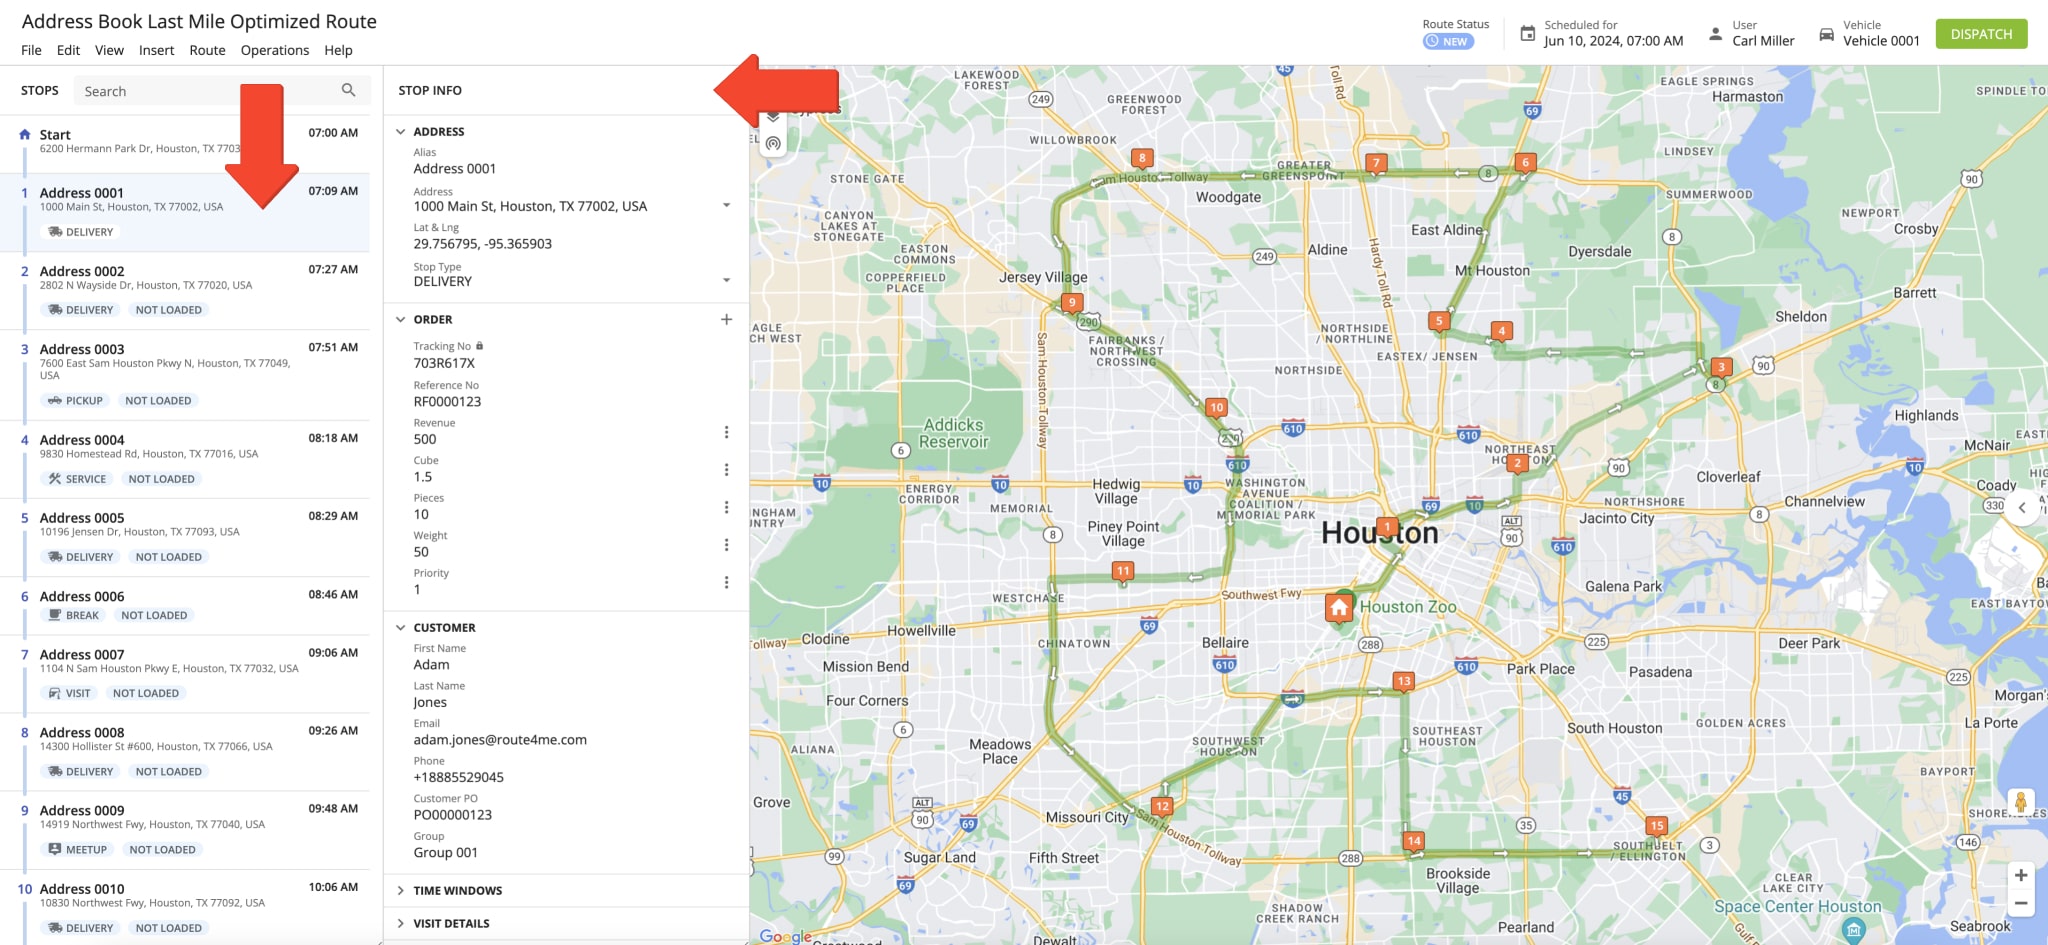 Planned and optimized last mile driver route with Address Book List addresses and customer locations.